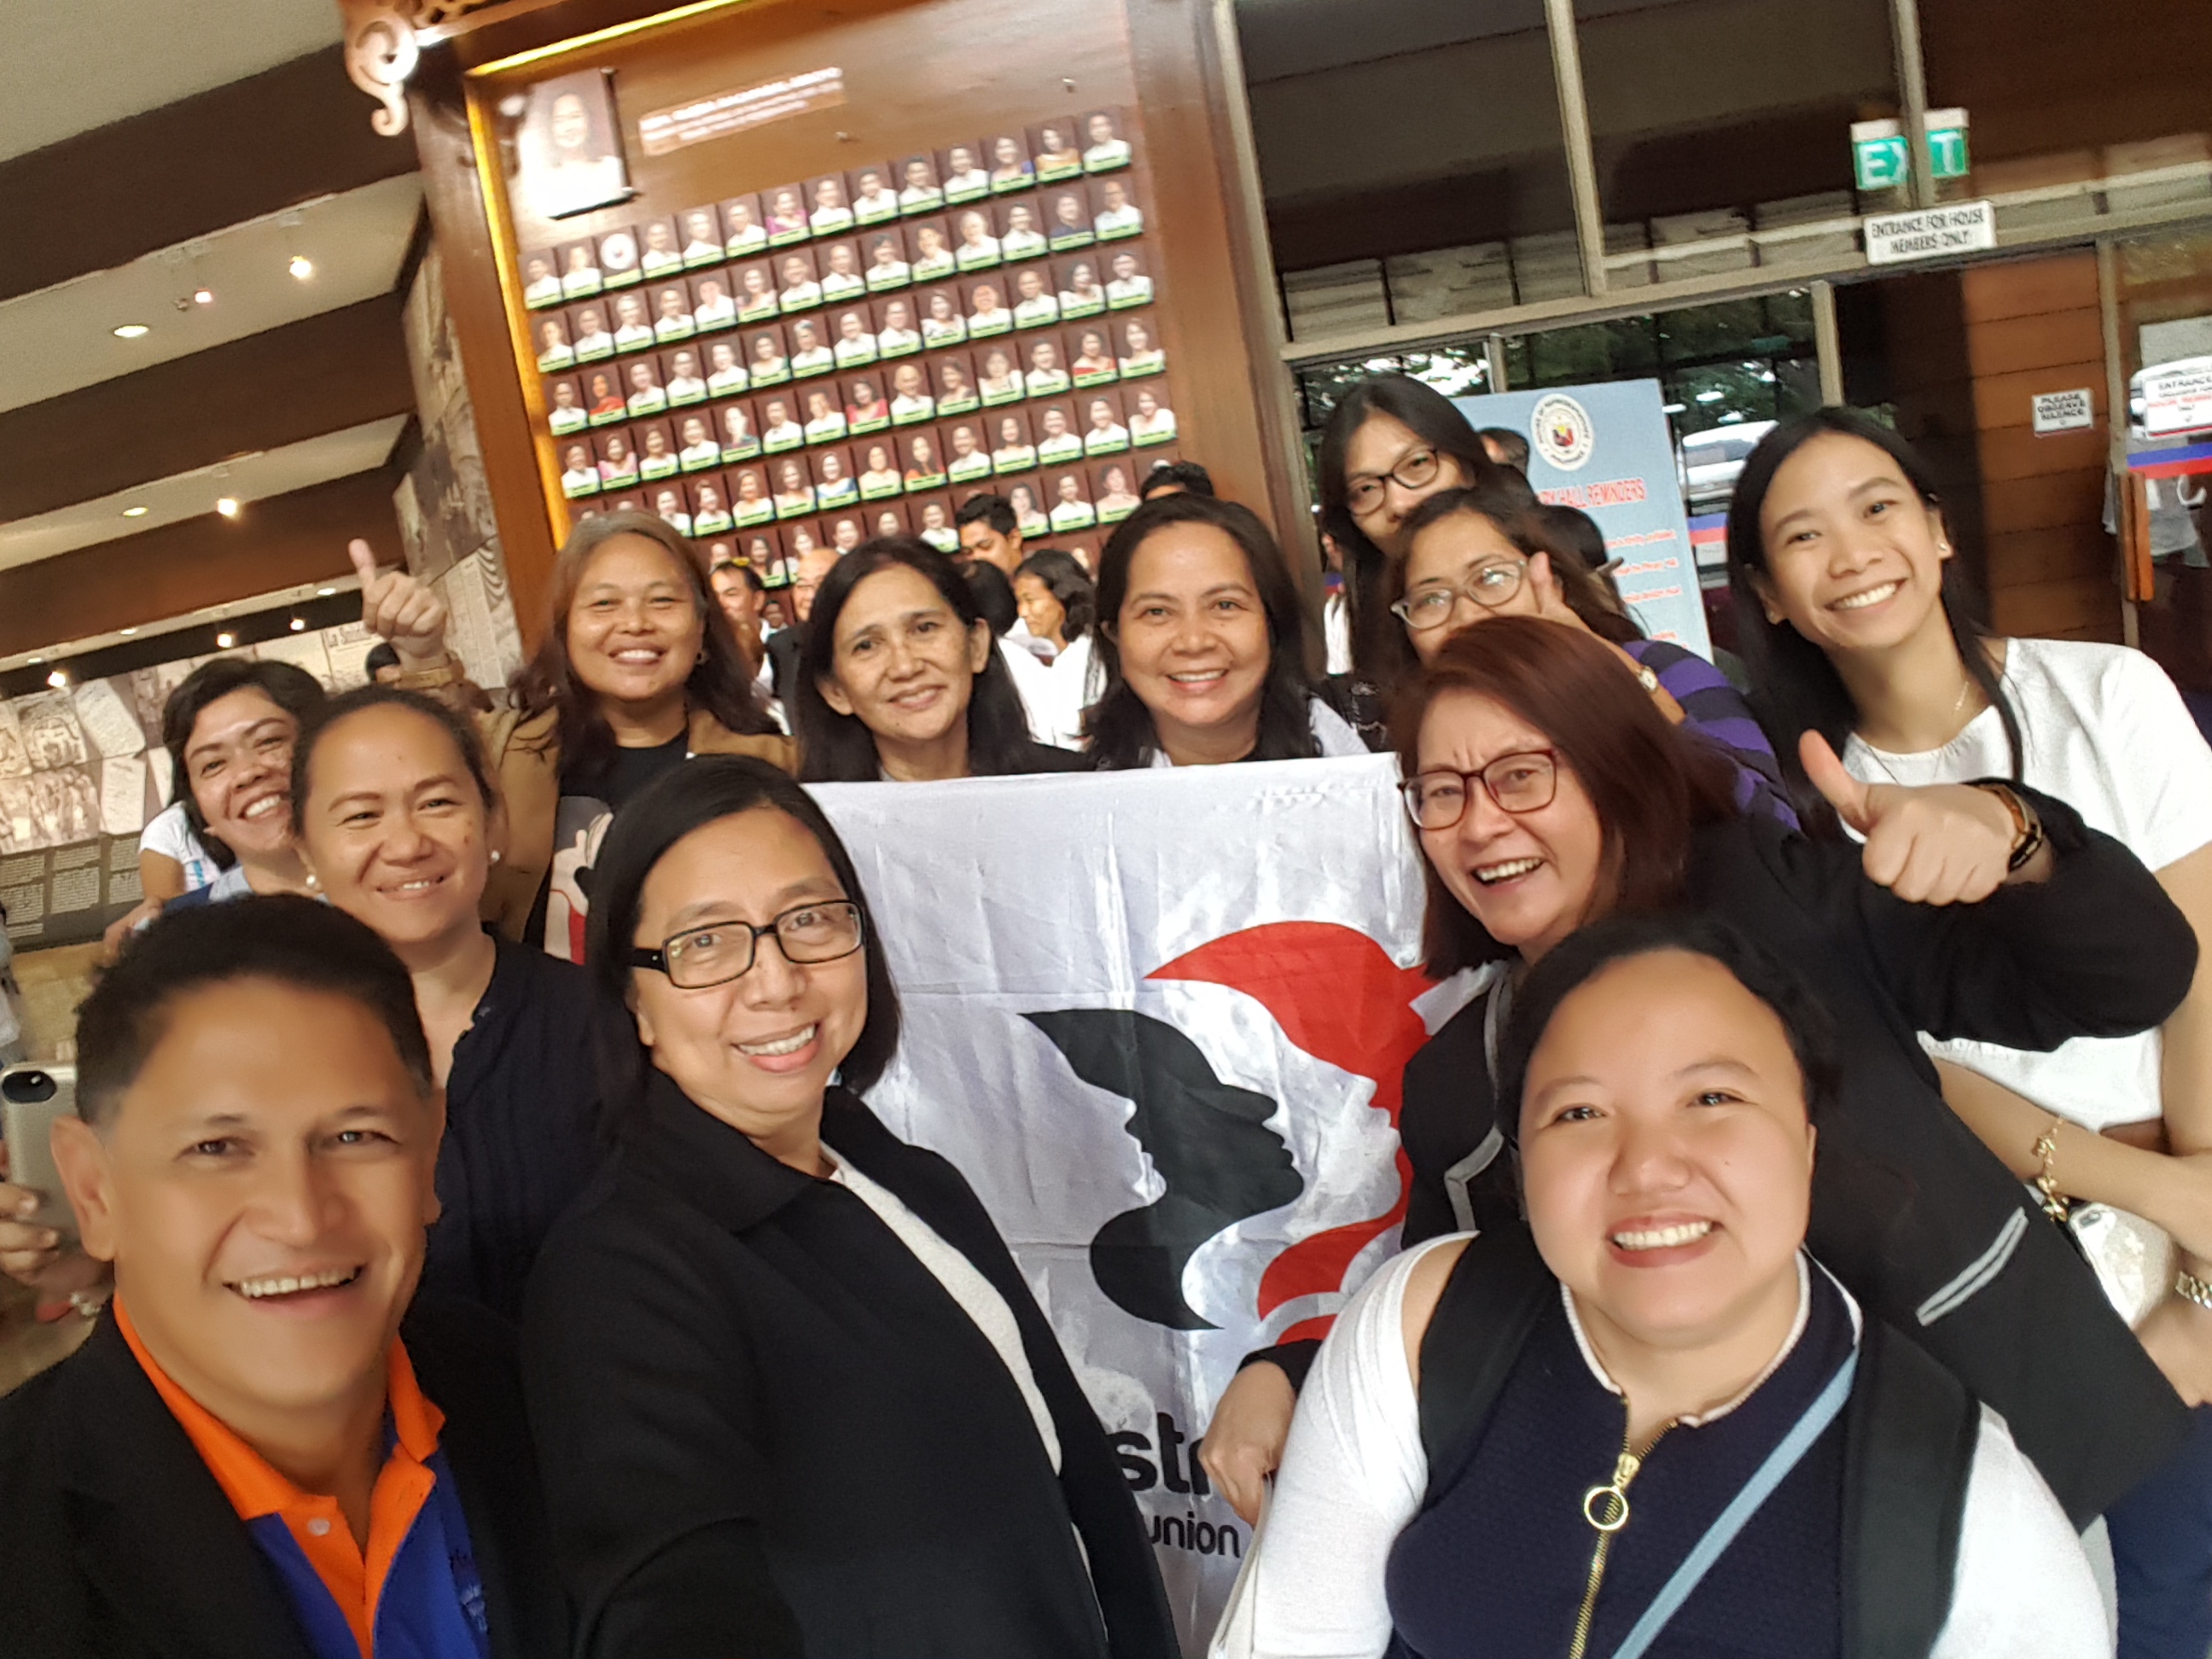 Expanded maternity leave becomes law in the Philippines | IndustriALL